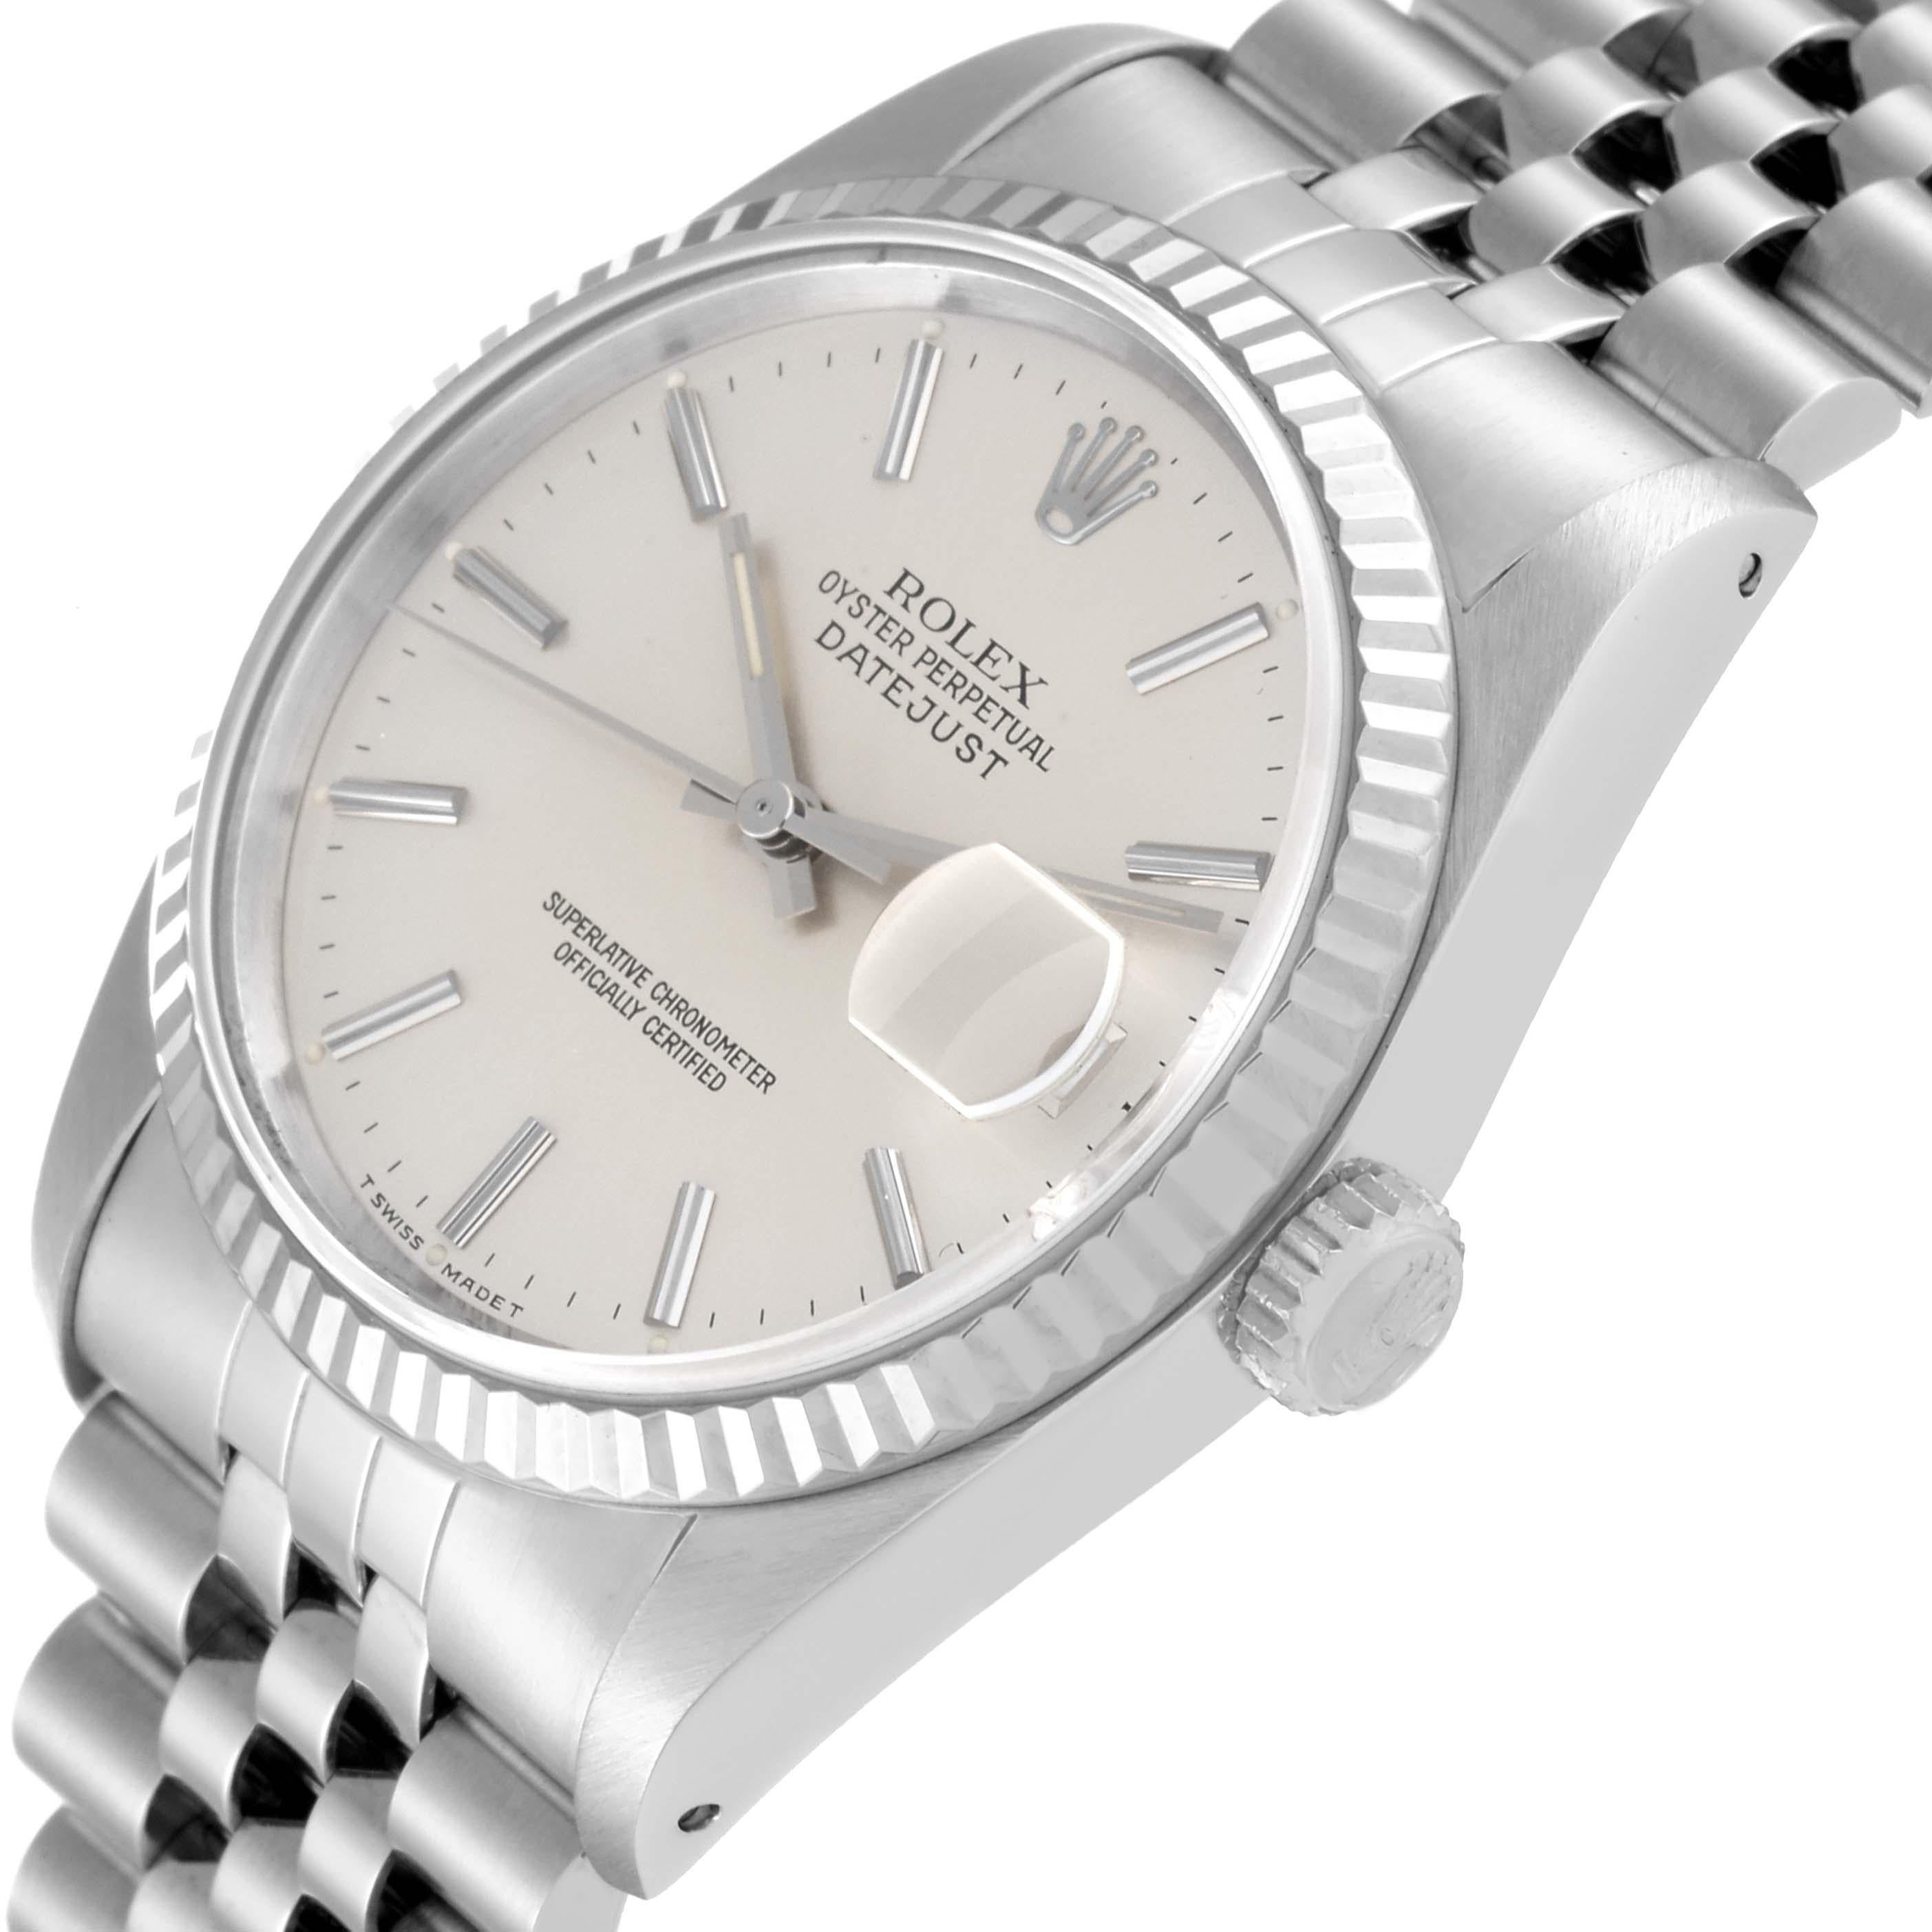 Rolex Datejust Steel White Gold Silver Dial Mens Watch 16234 1